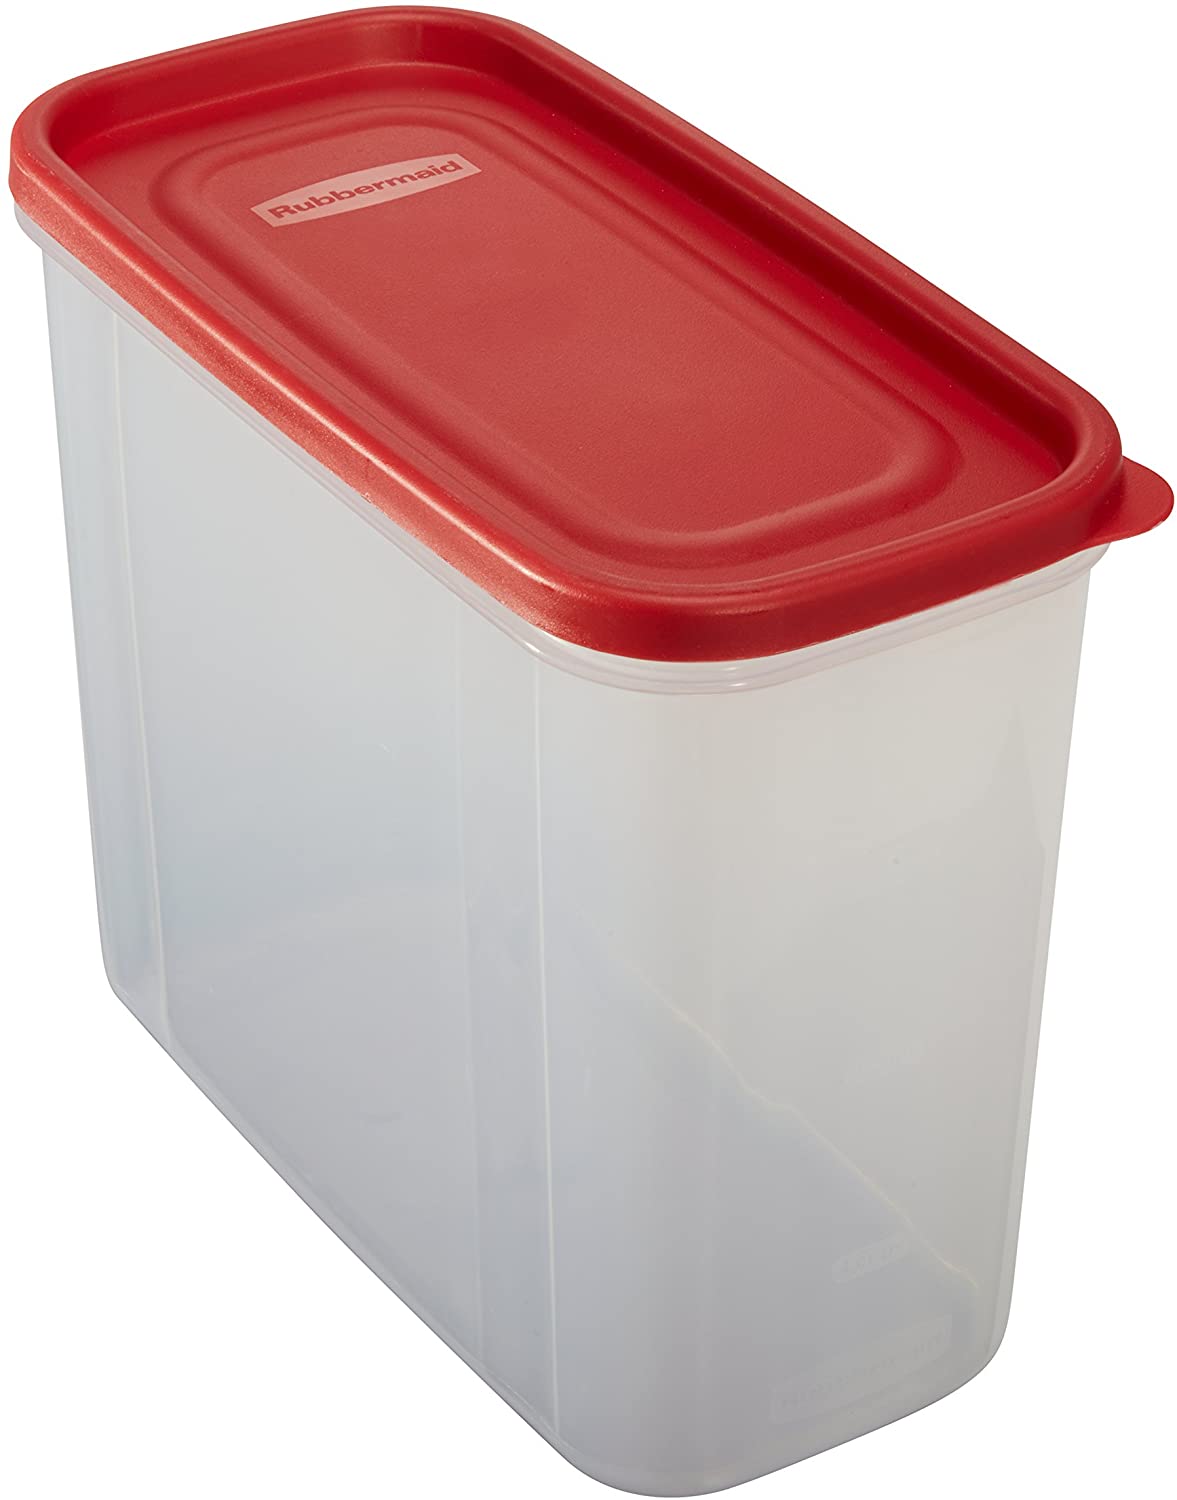 Rubbermaid Modular Canister Food Storage Container with Lid, 10